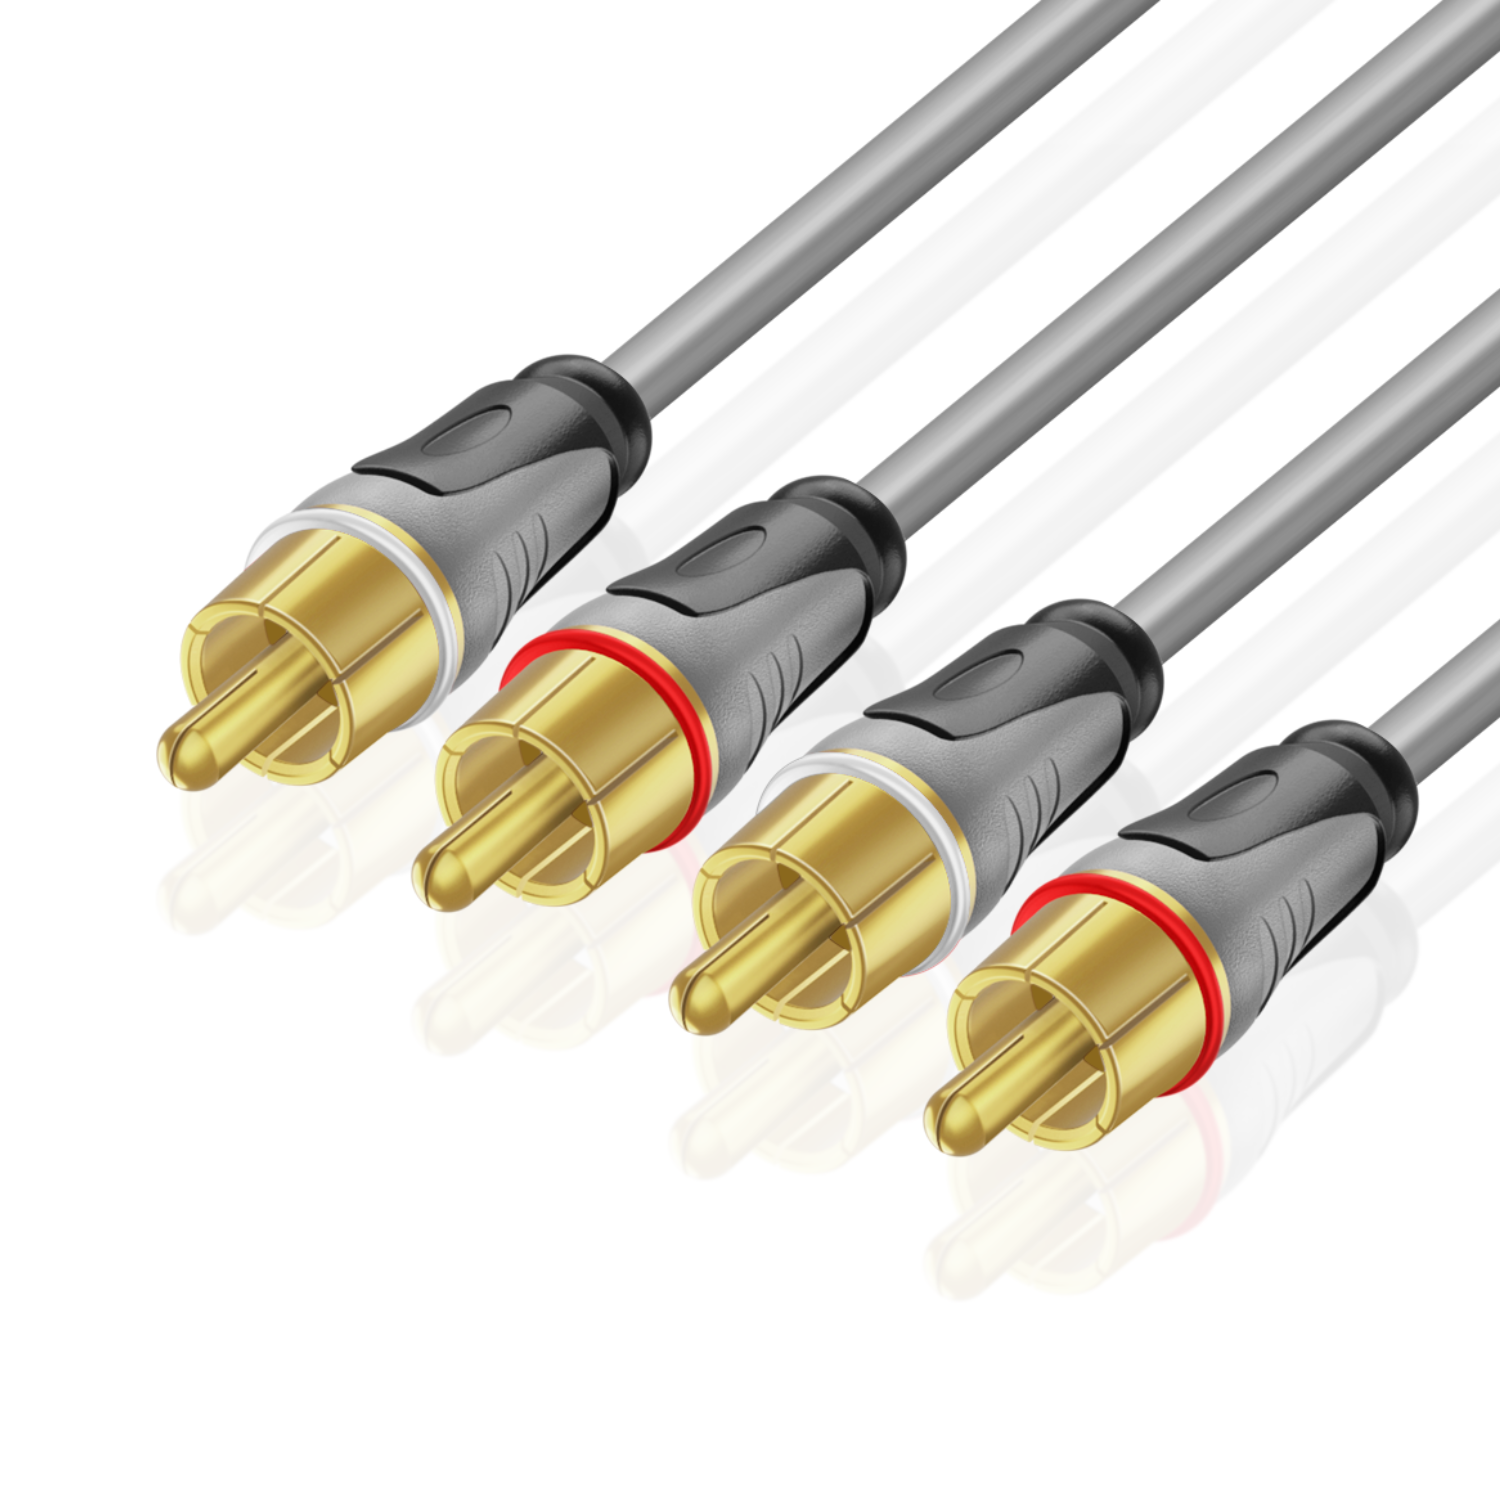 RCA Cable - 2RCA Male to 2RCA Male with Dual Shielded RCA Audio Cable - 2 Channel RCA Male to Male Stereo Connector, Gold Plated RCA Cables 6ft for Amplifiers, Car Audio, Home Theater, Speakers - image 1 of 6